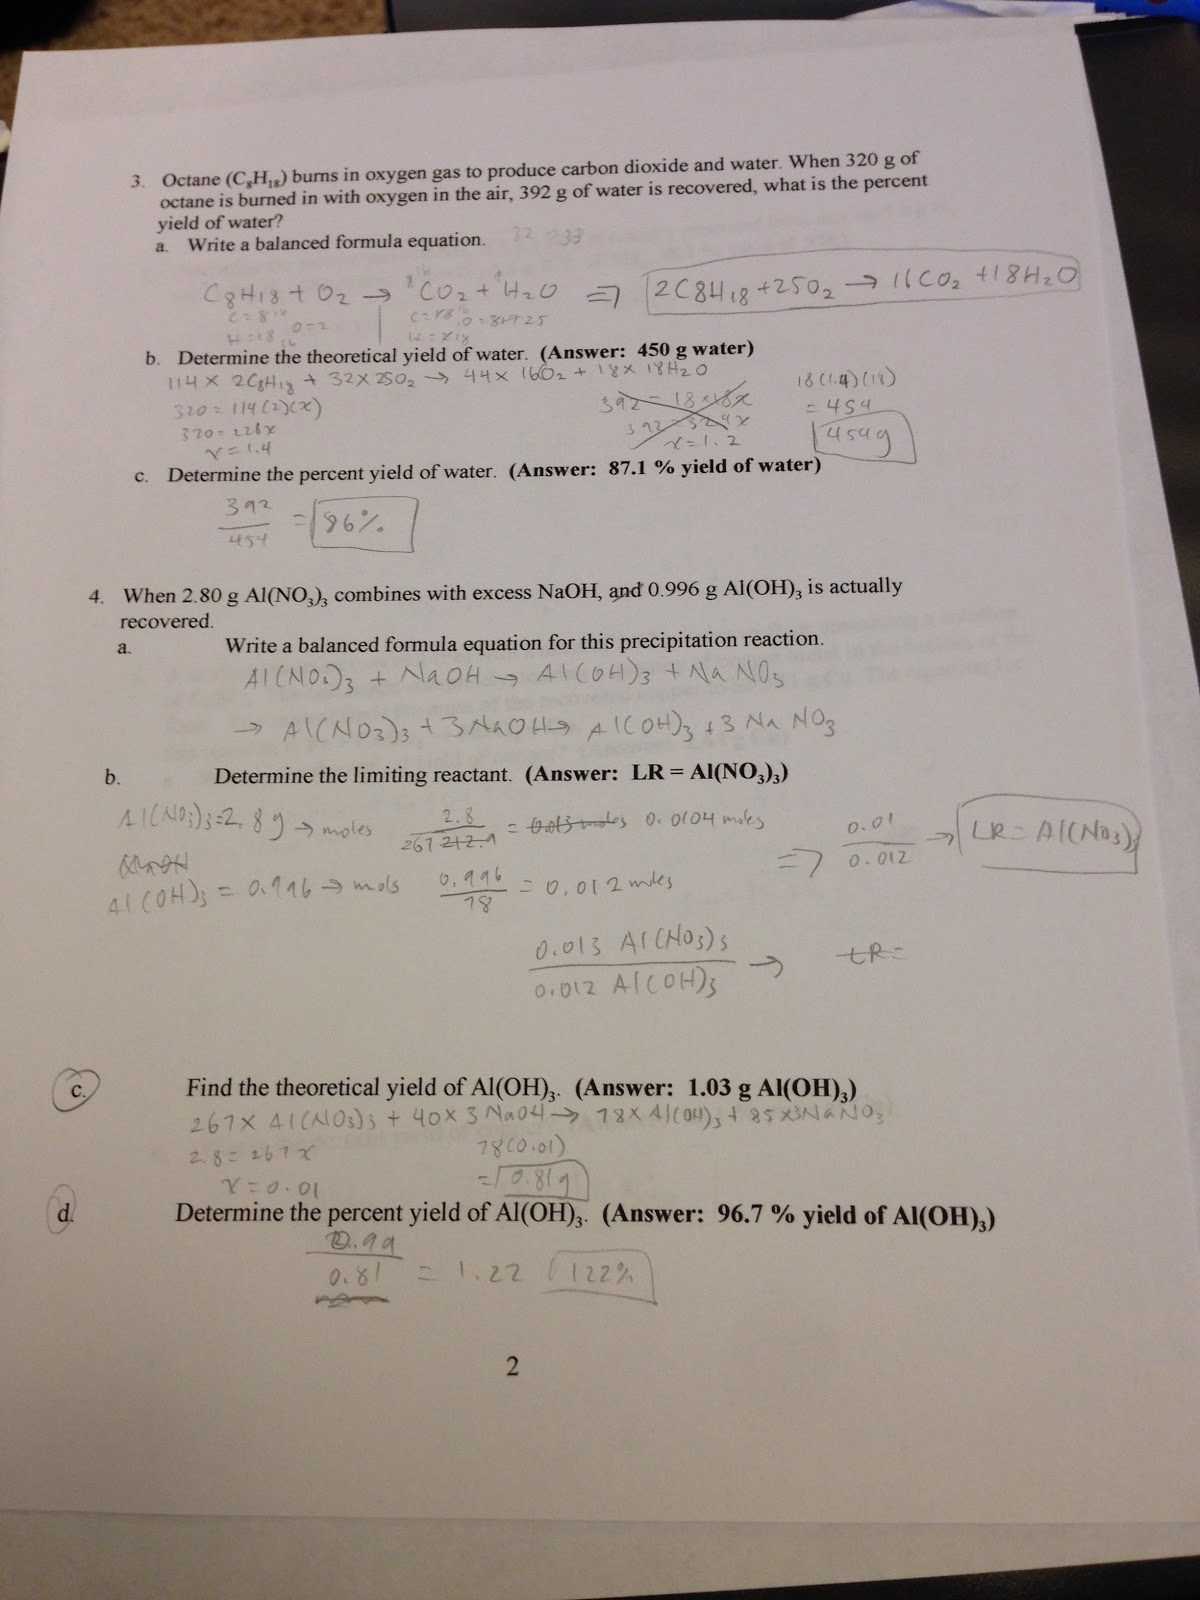 Limiting Reagent Worksheet Also theoretical and Percent Yield Worksheet Answers & ""sc" 1"st" "